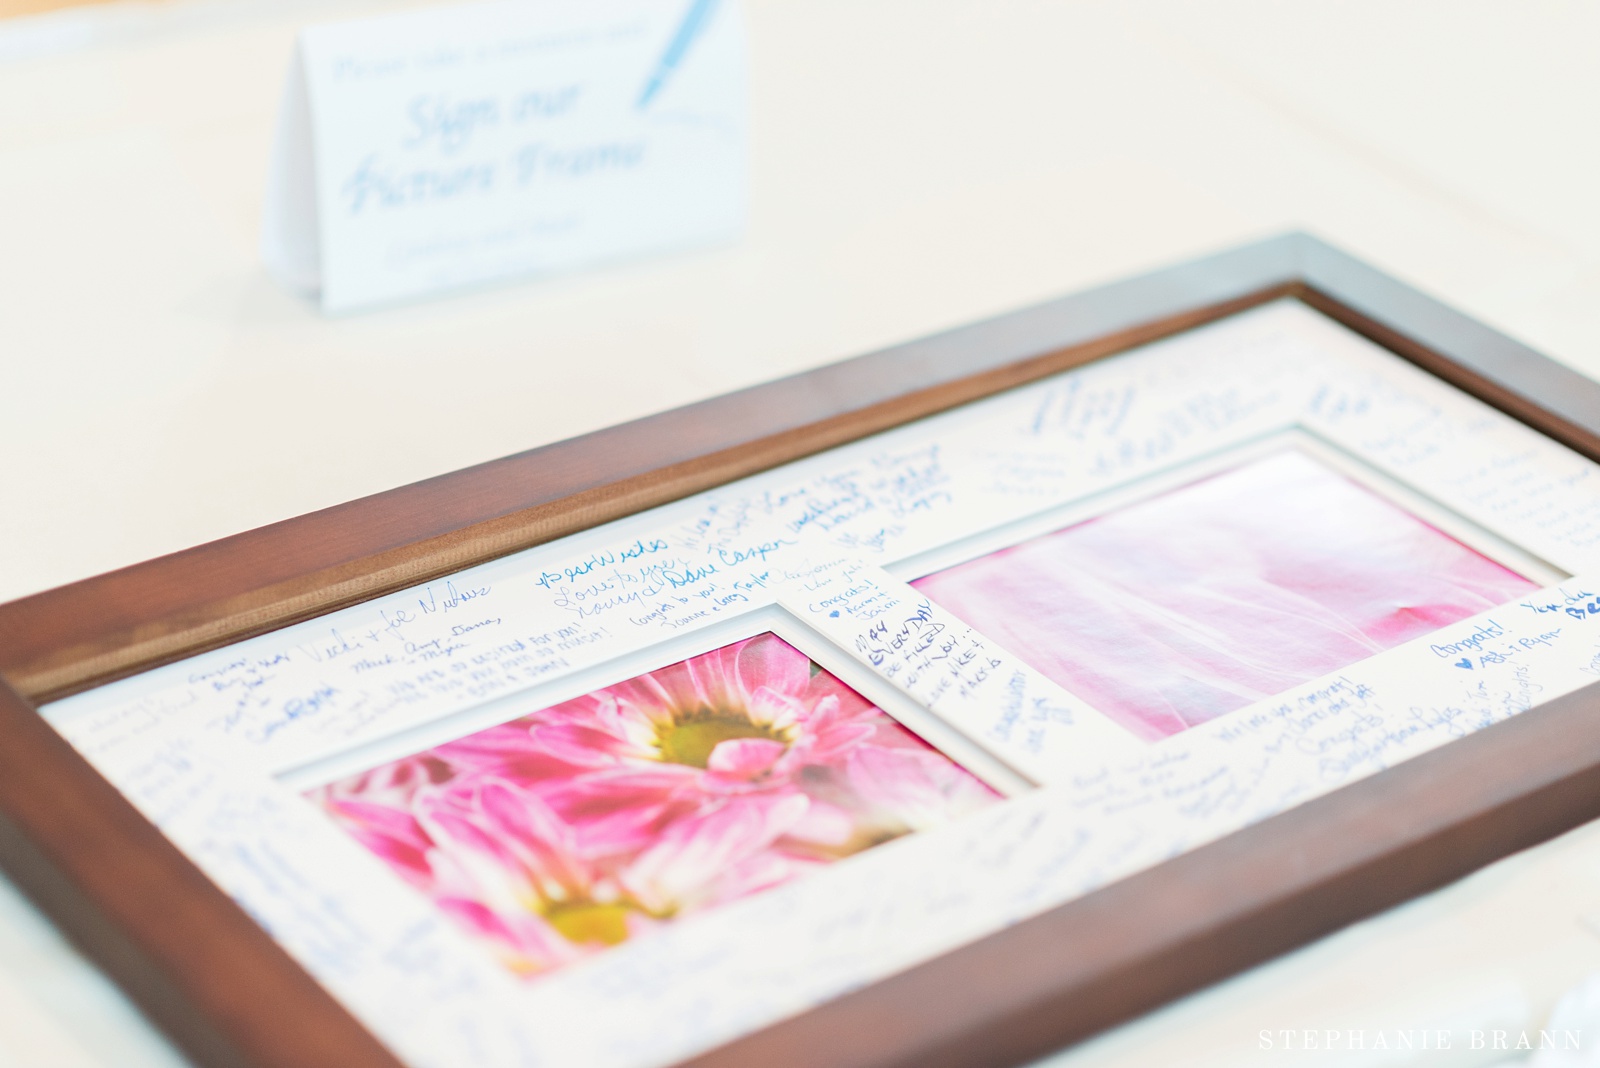 signatures-on-a-picture-frame-that-wedding-guests-signed